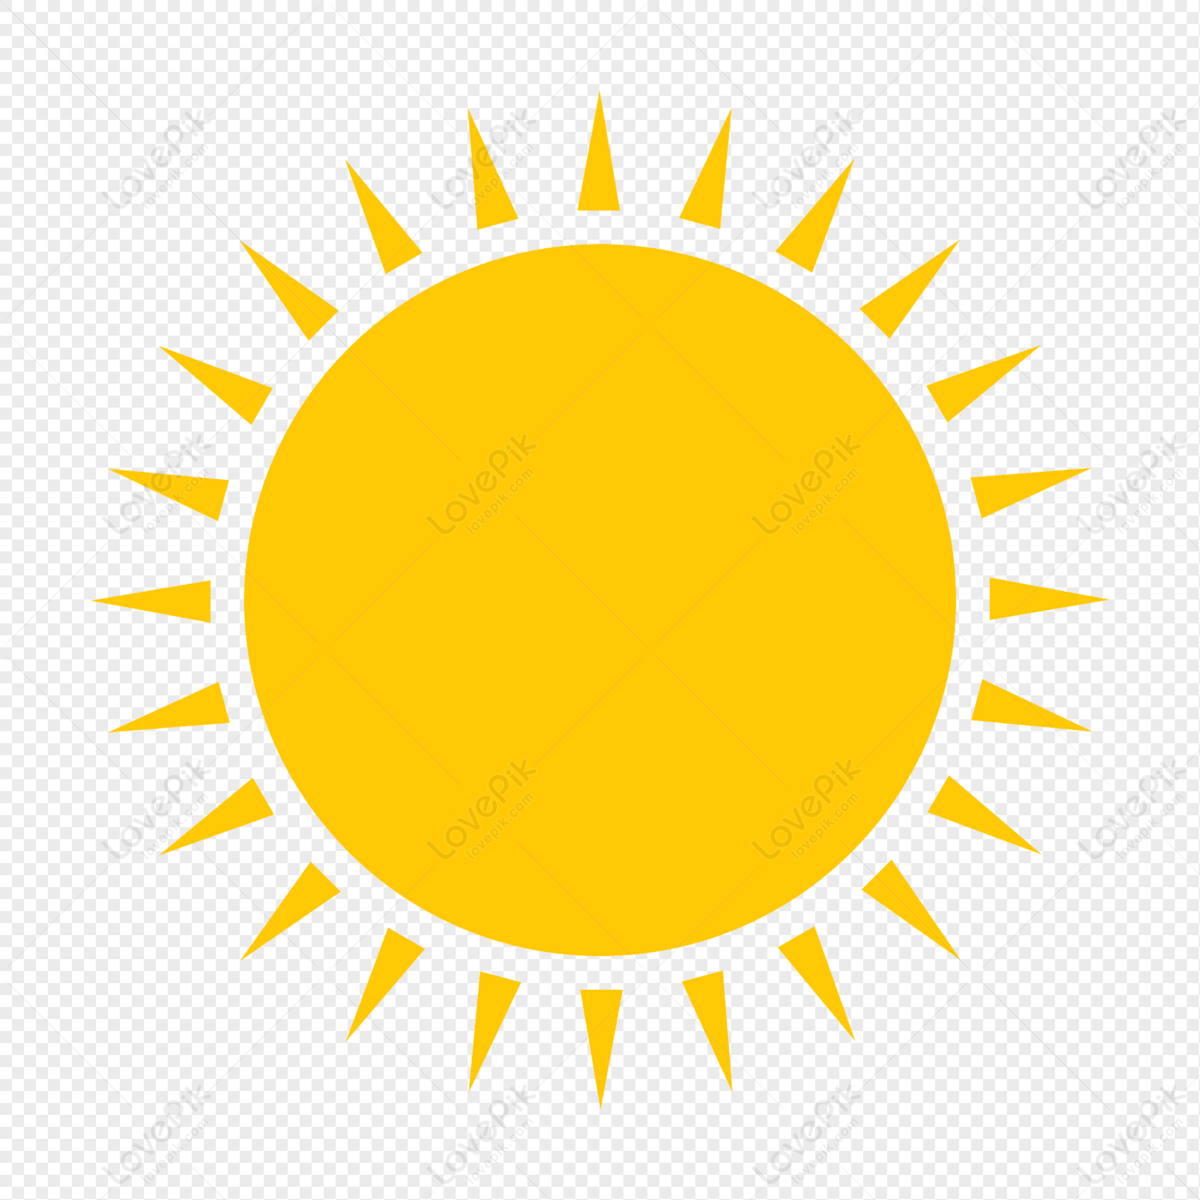 Sun PNG Transparent And Clipart Image For Free Download - Lovepik ...